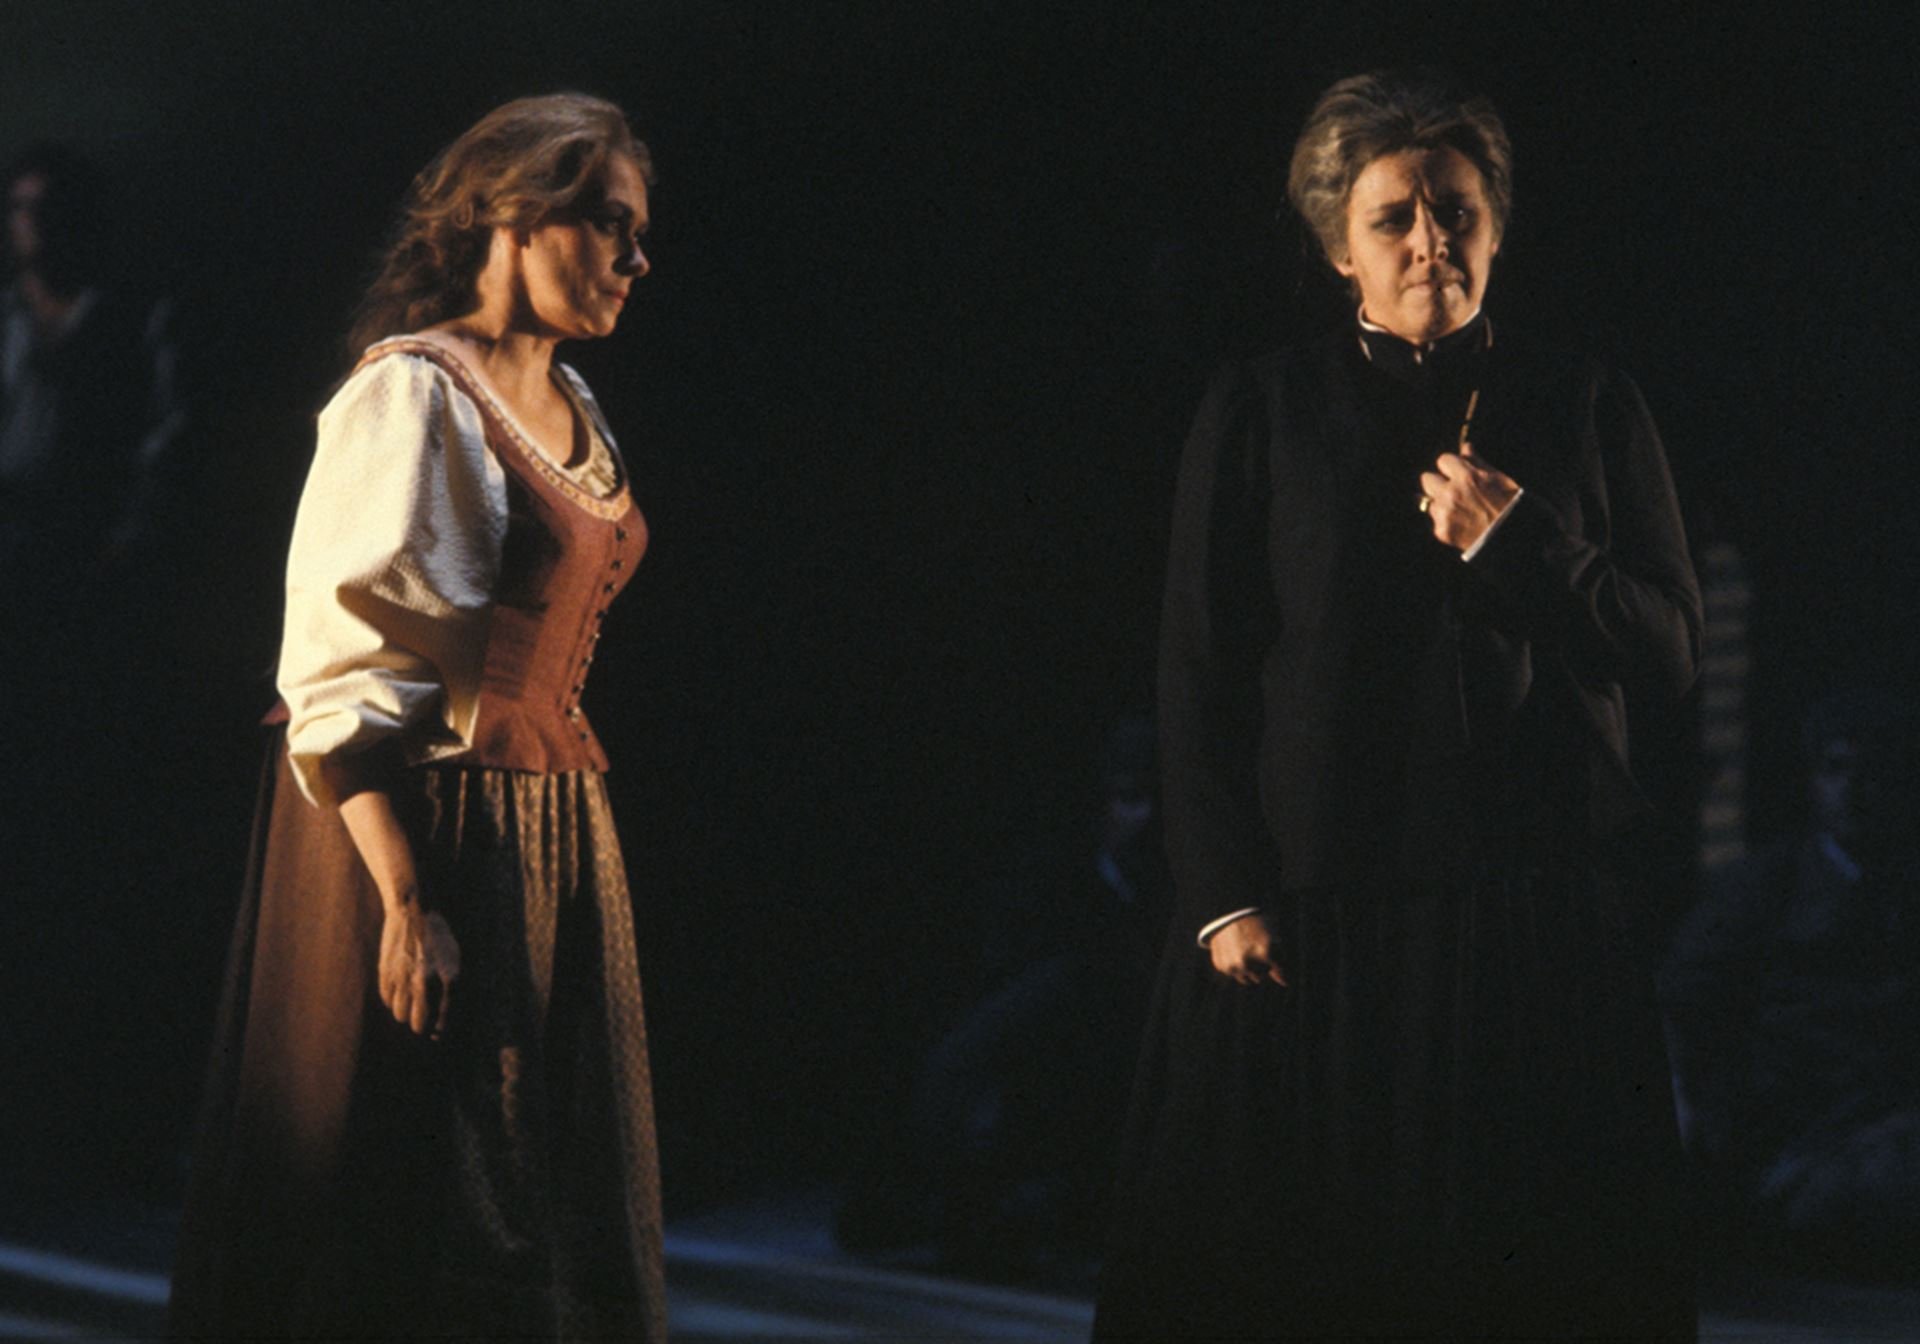 two women on stage performing opera.